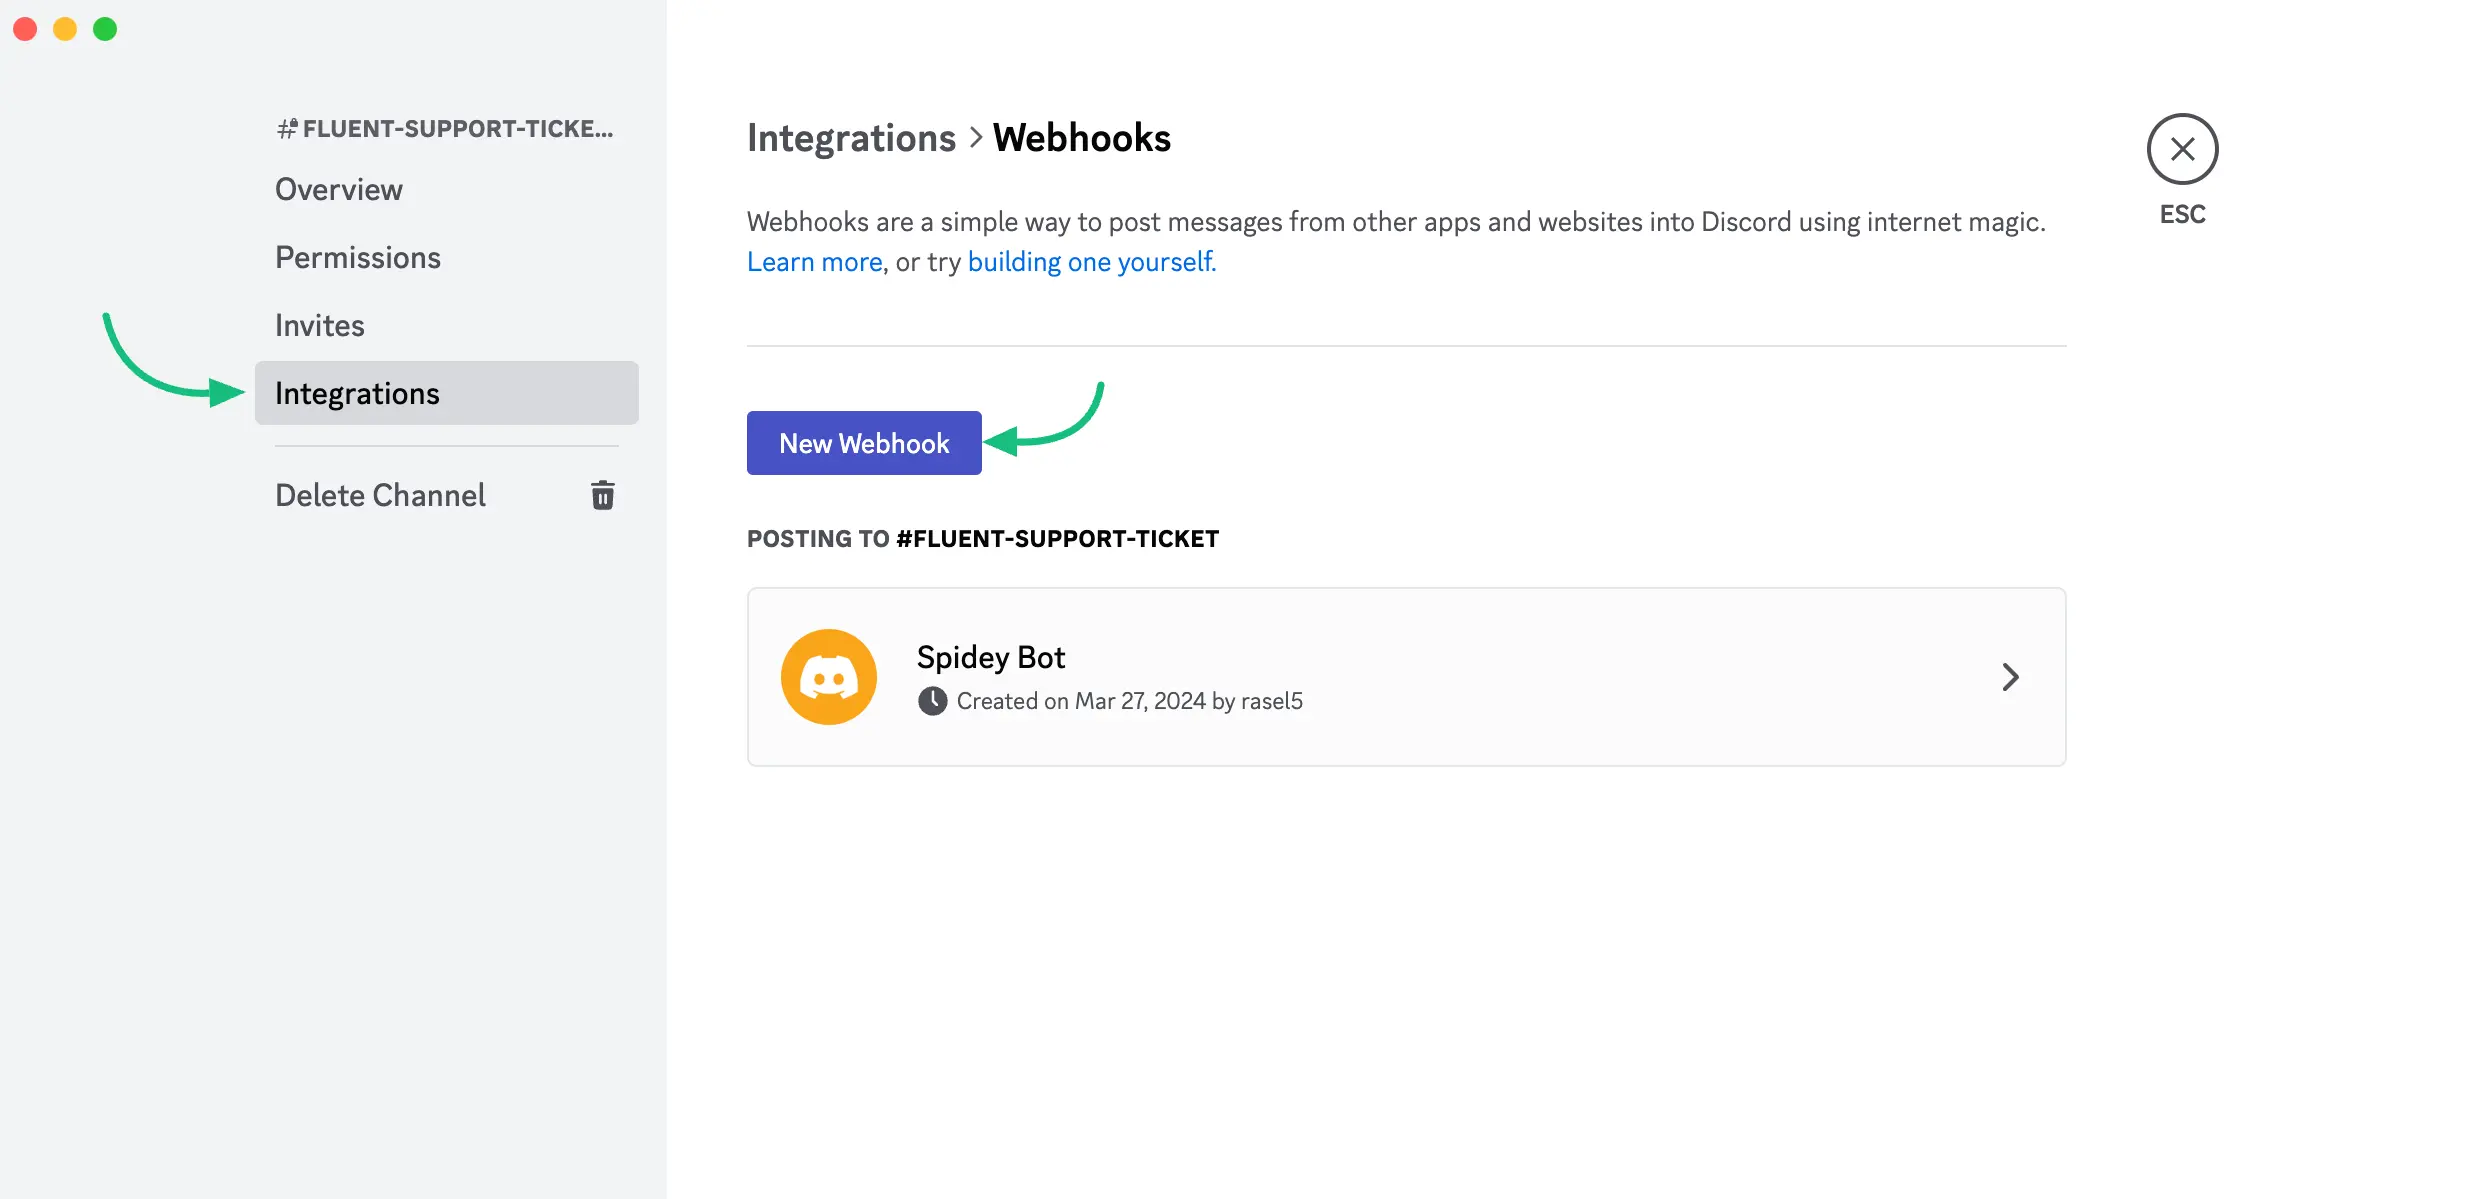 Integrations and Webhook